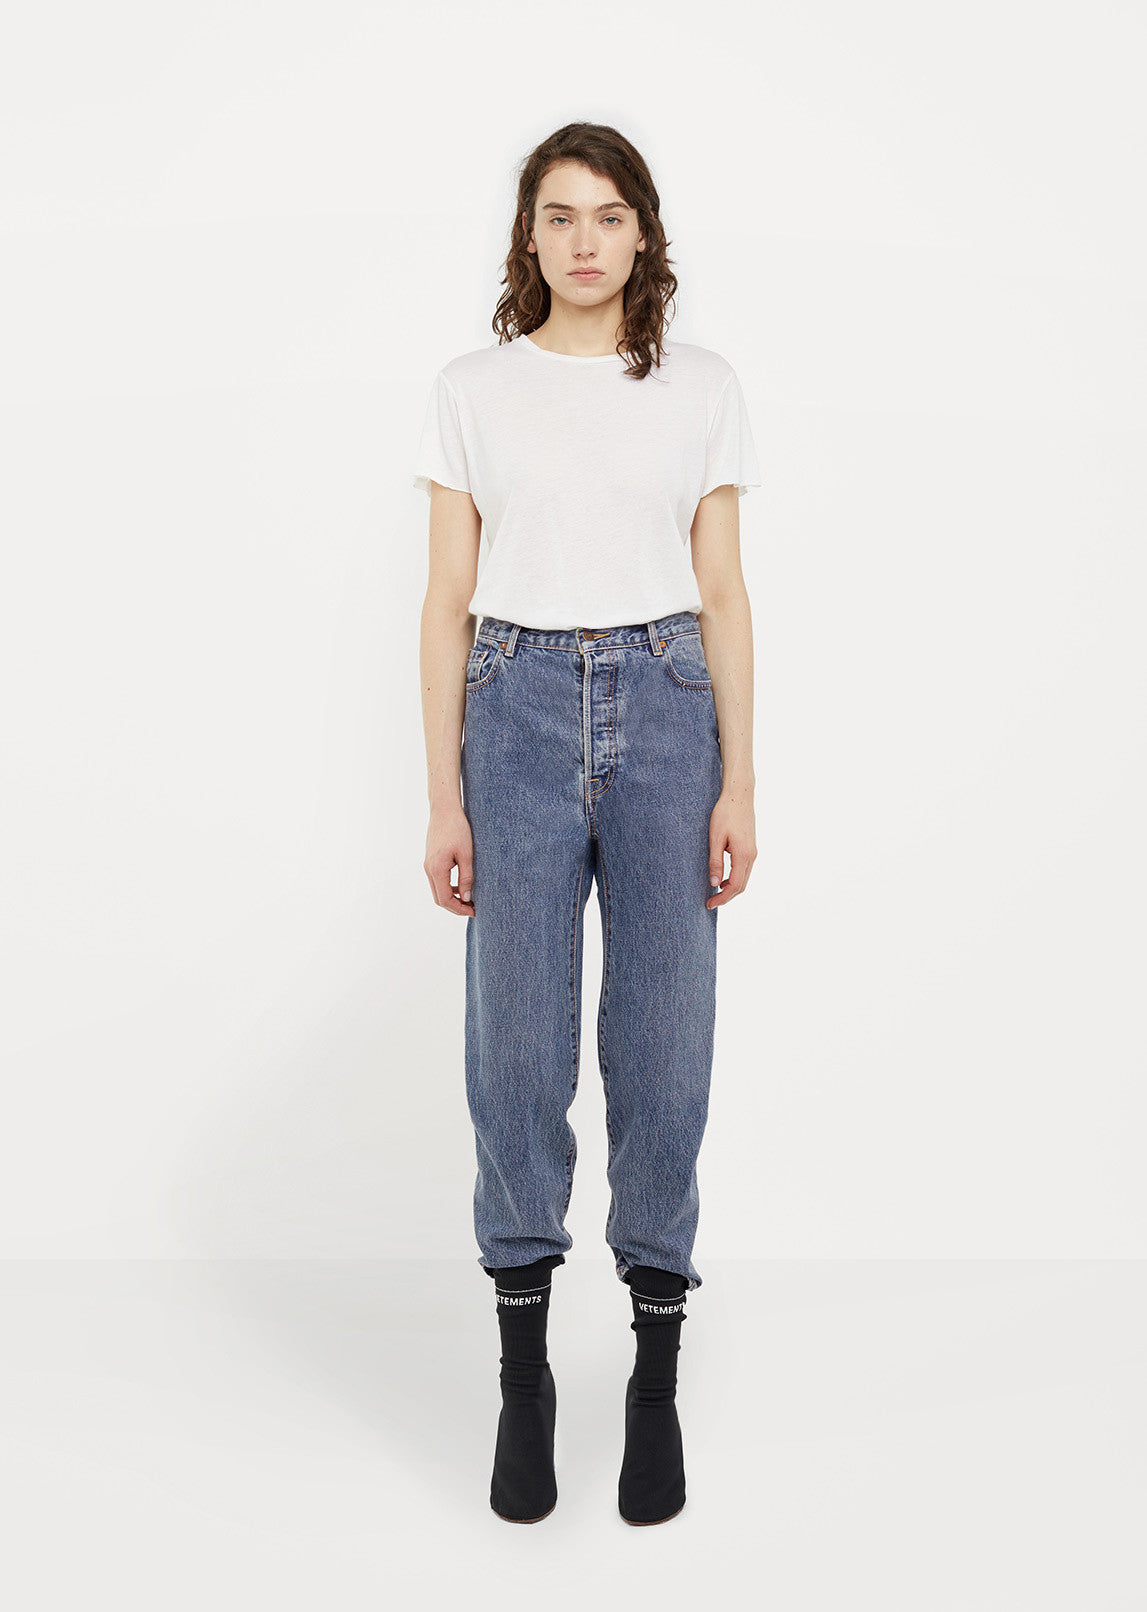 Classic High Waist Jeans by Vetements 